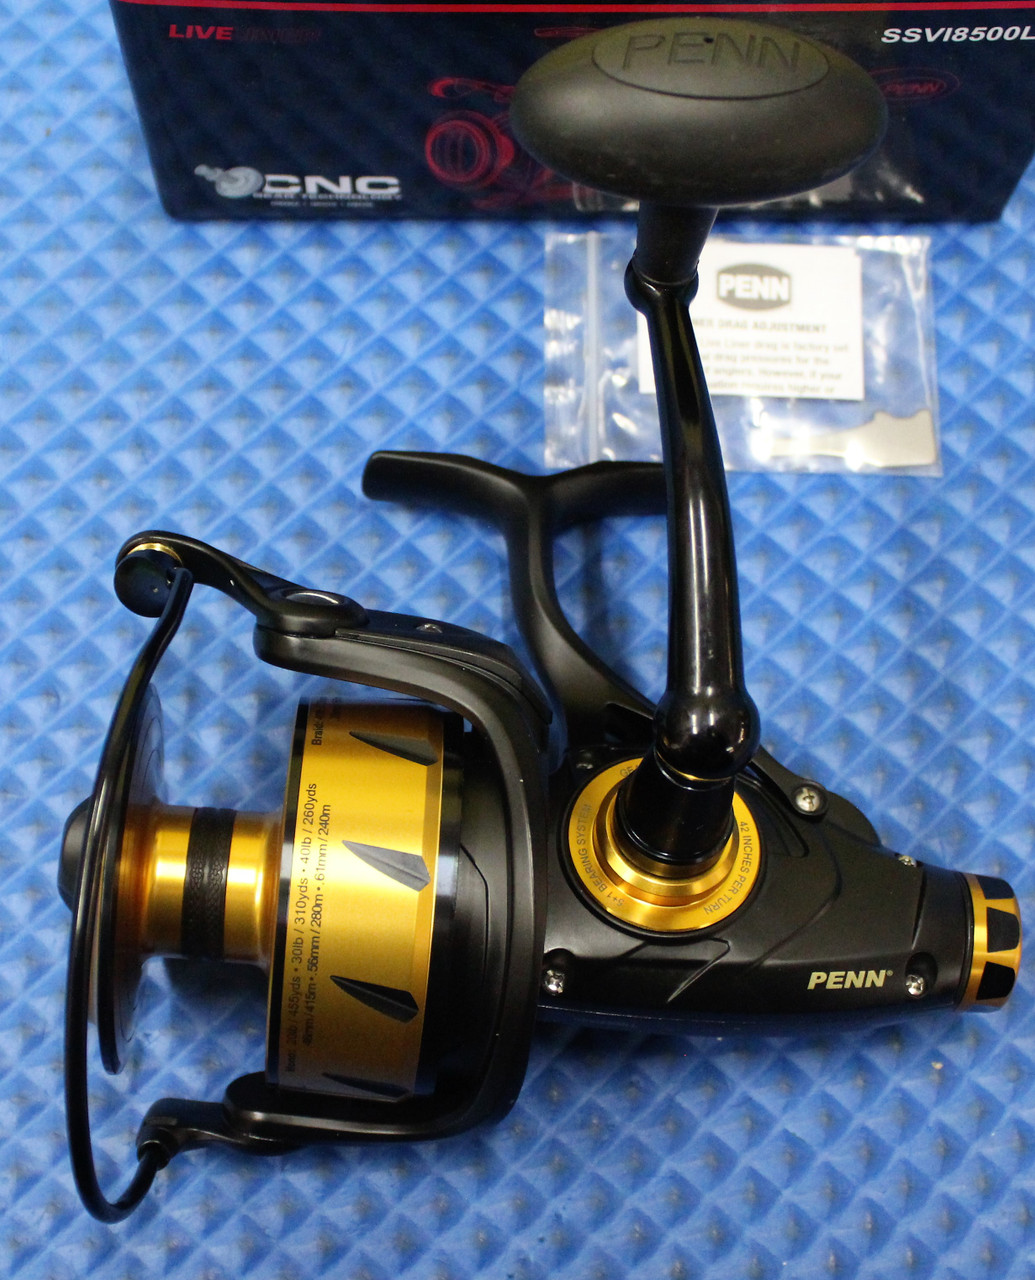 Penn Sparespools Spinfisher VI Fishng Reels